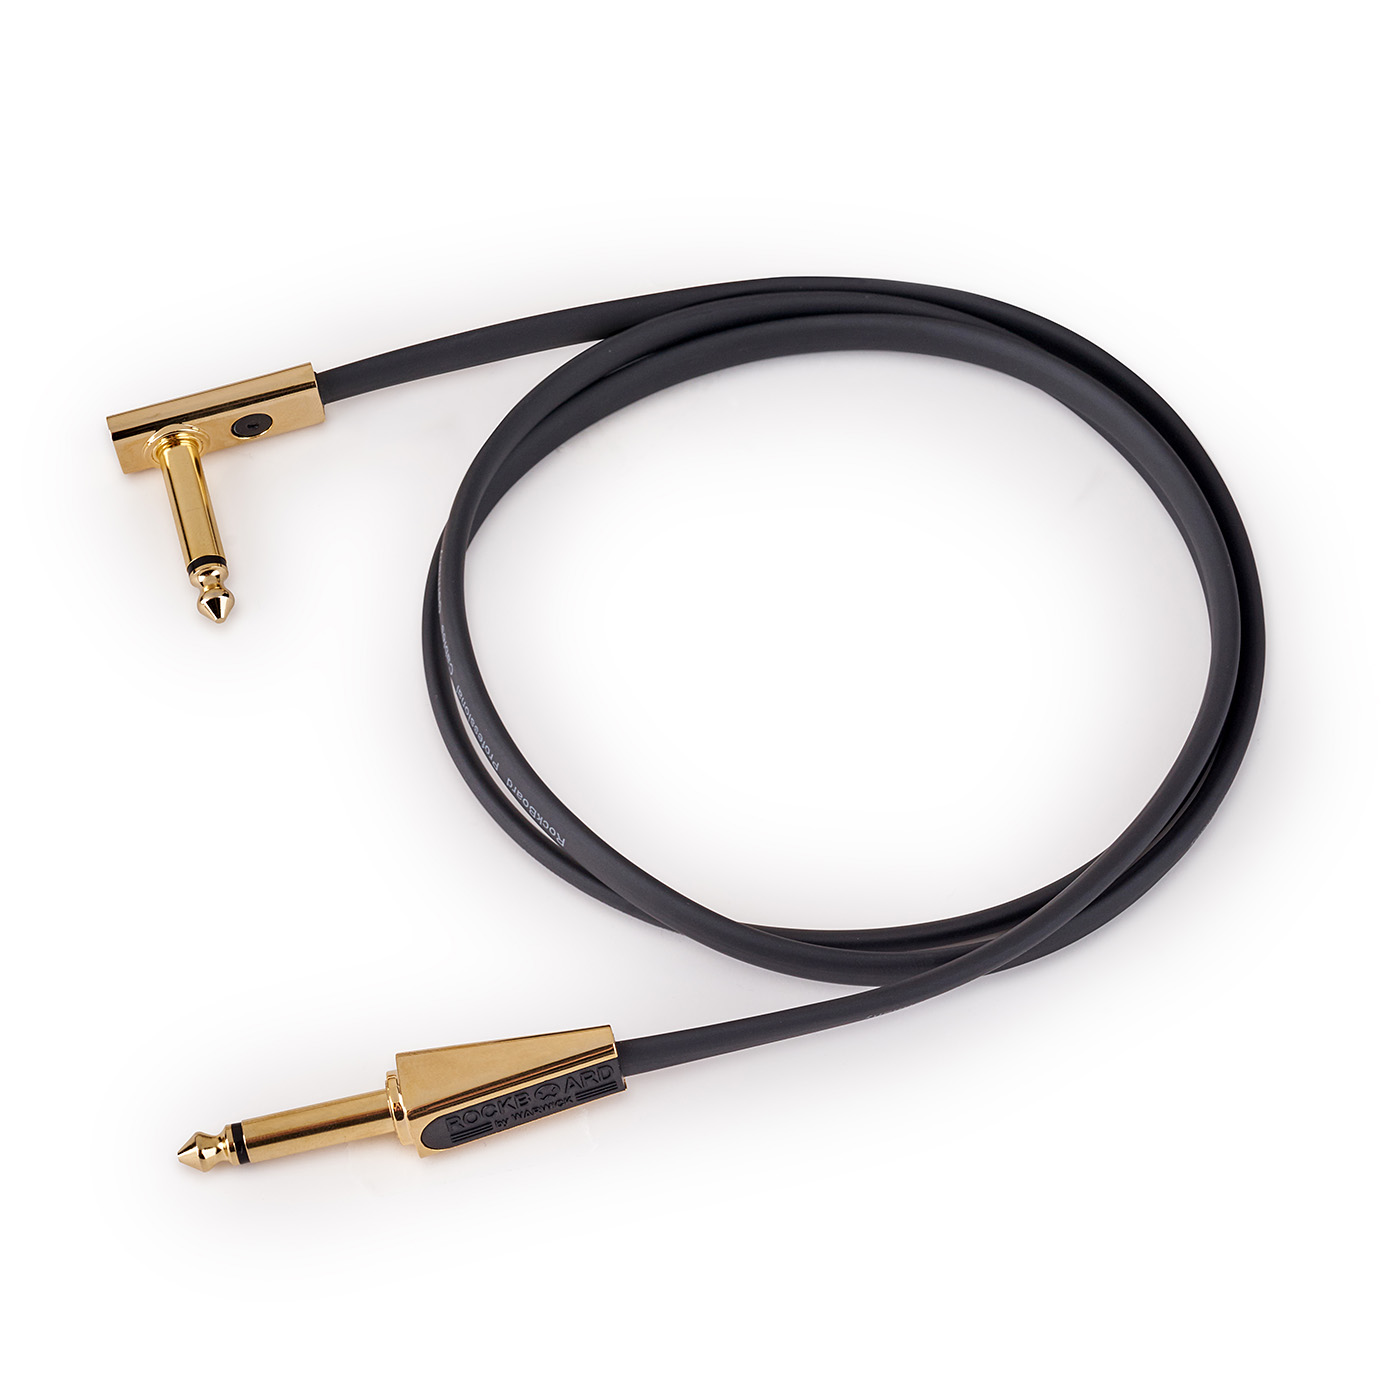 RockBoard Gold Series Flat Patch Looper/Switcher Connector Cable - 100 cm / 39 3/8"